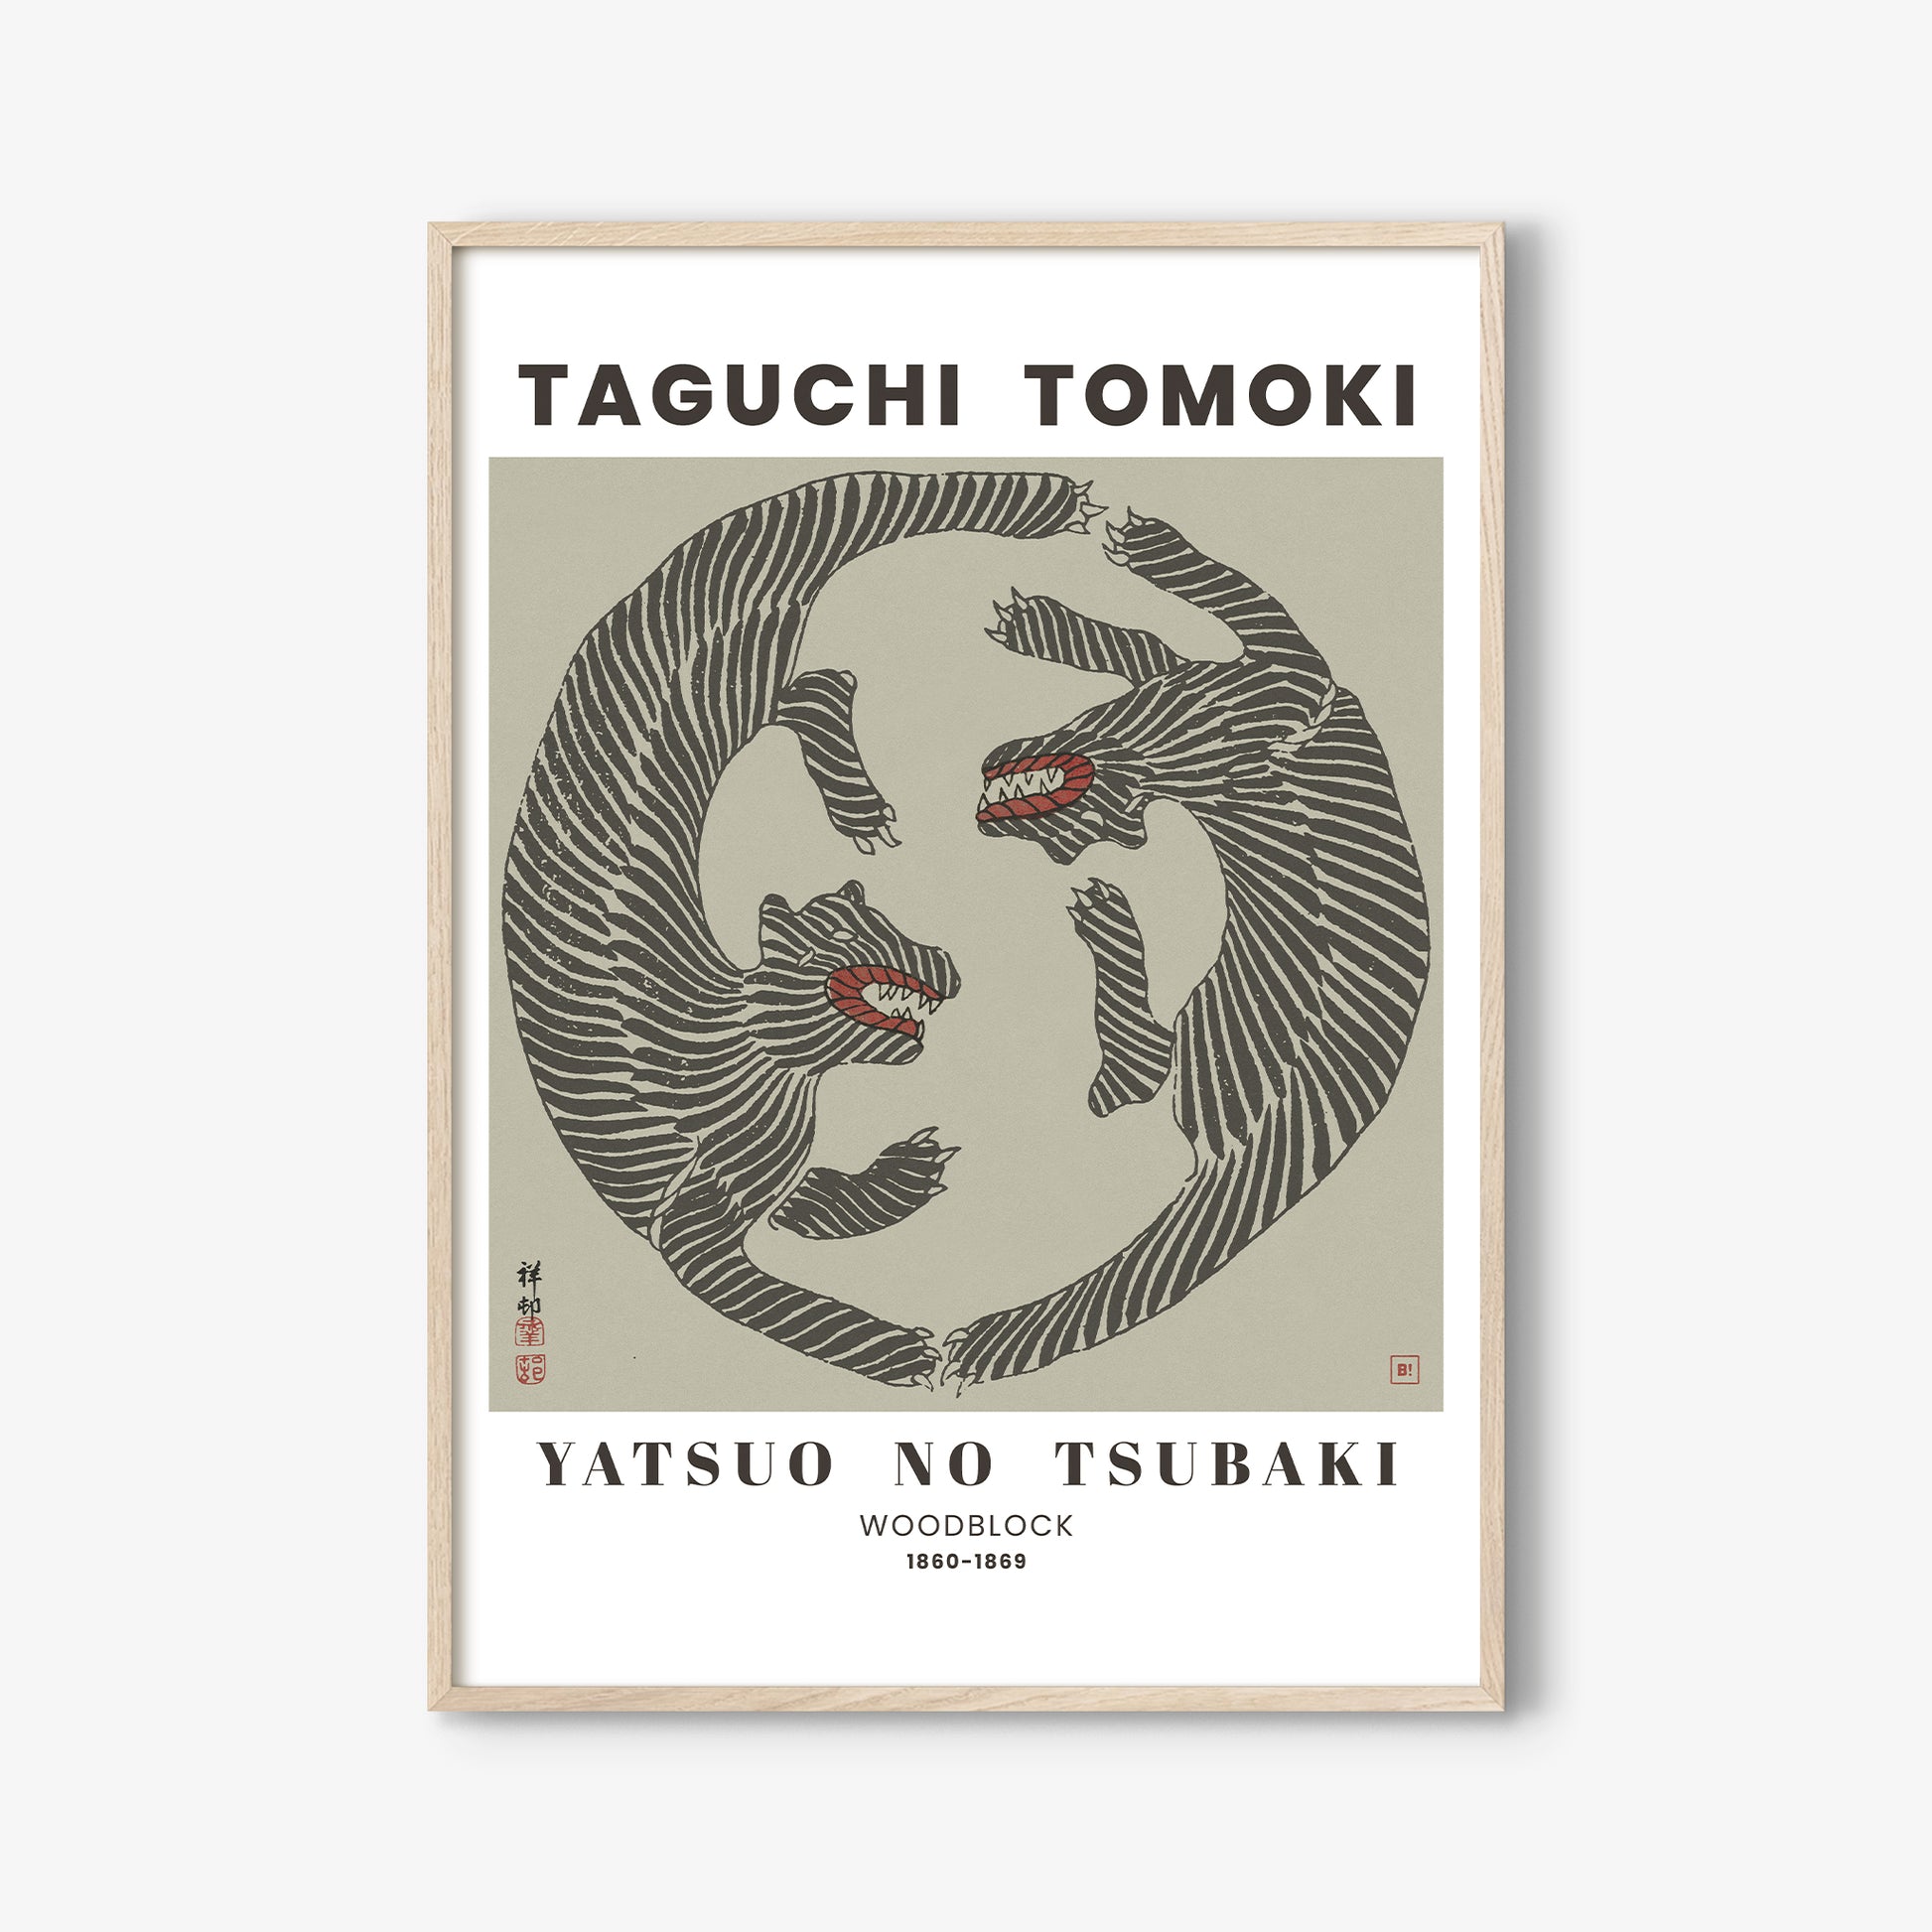 Be inspired by our remastered Taguchi Tomoki Woodblock Tigers Sage Green exhibition art print. This artwork was printed using the giclée process on archival acid-free paper and is presented in an light oak frame that captures its timeless beauty in every detail.